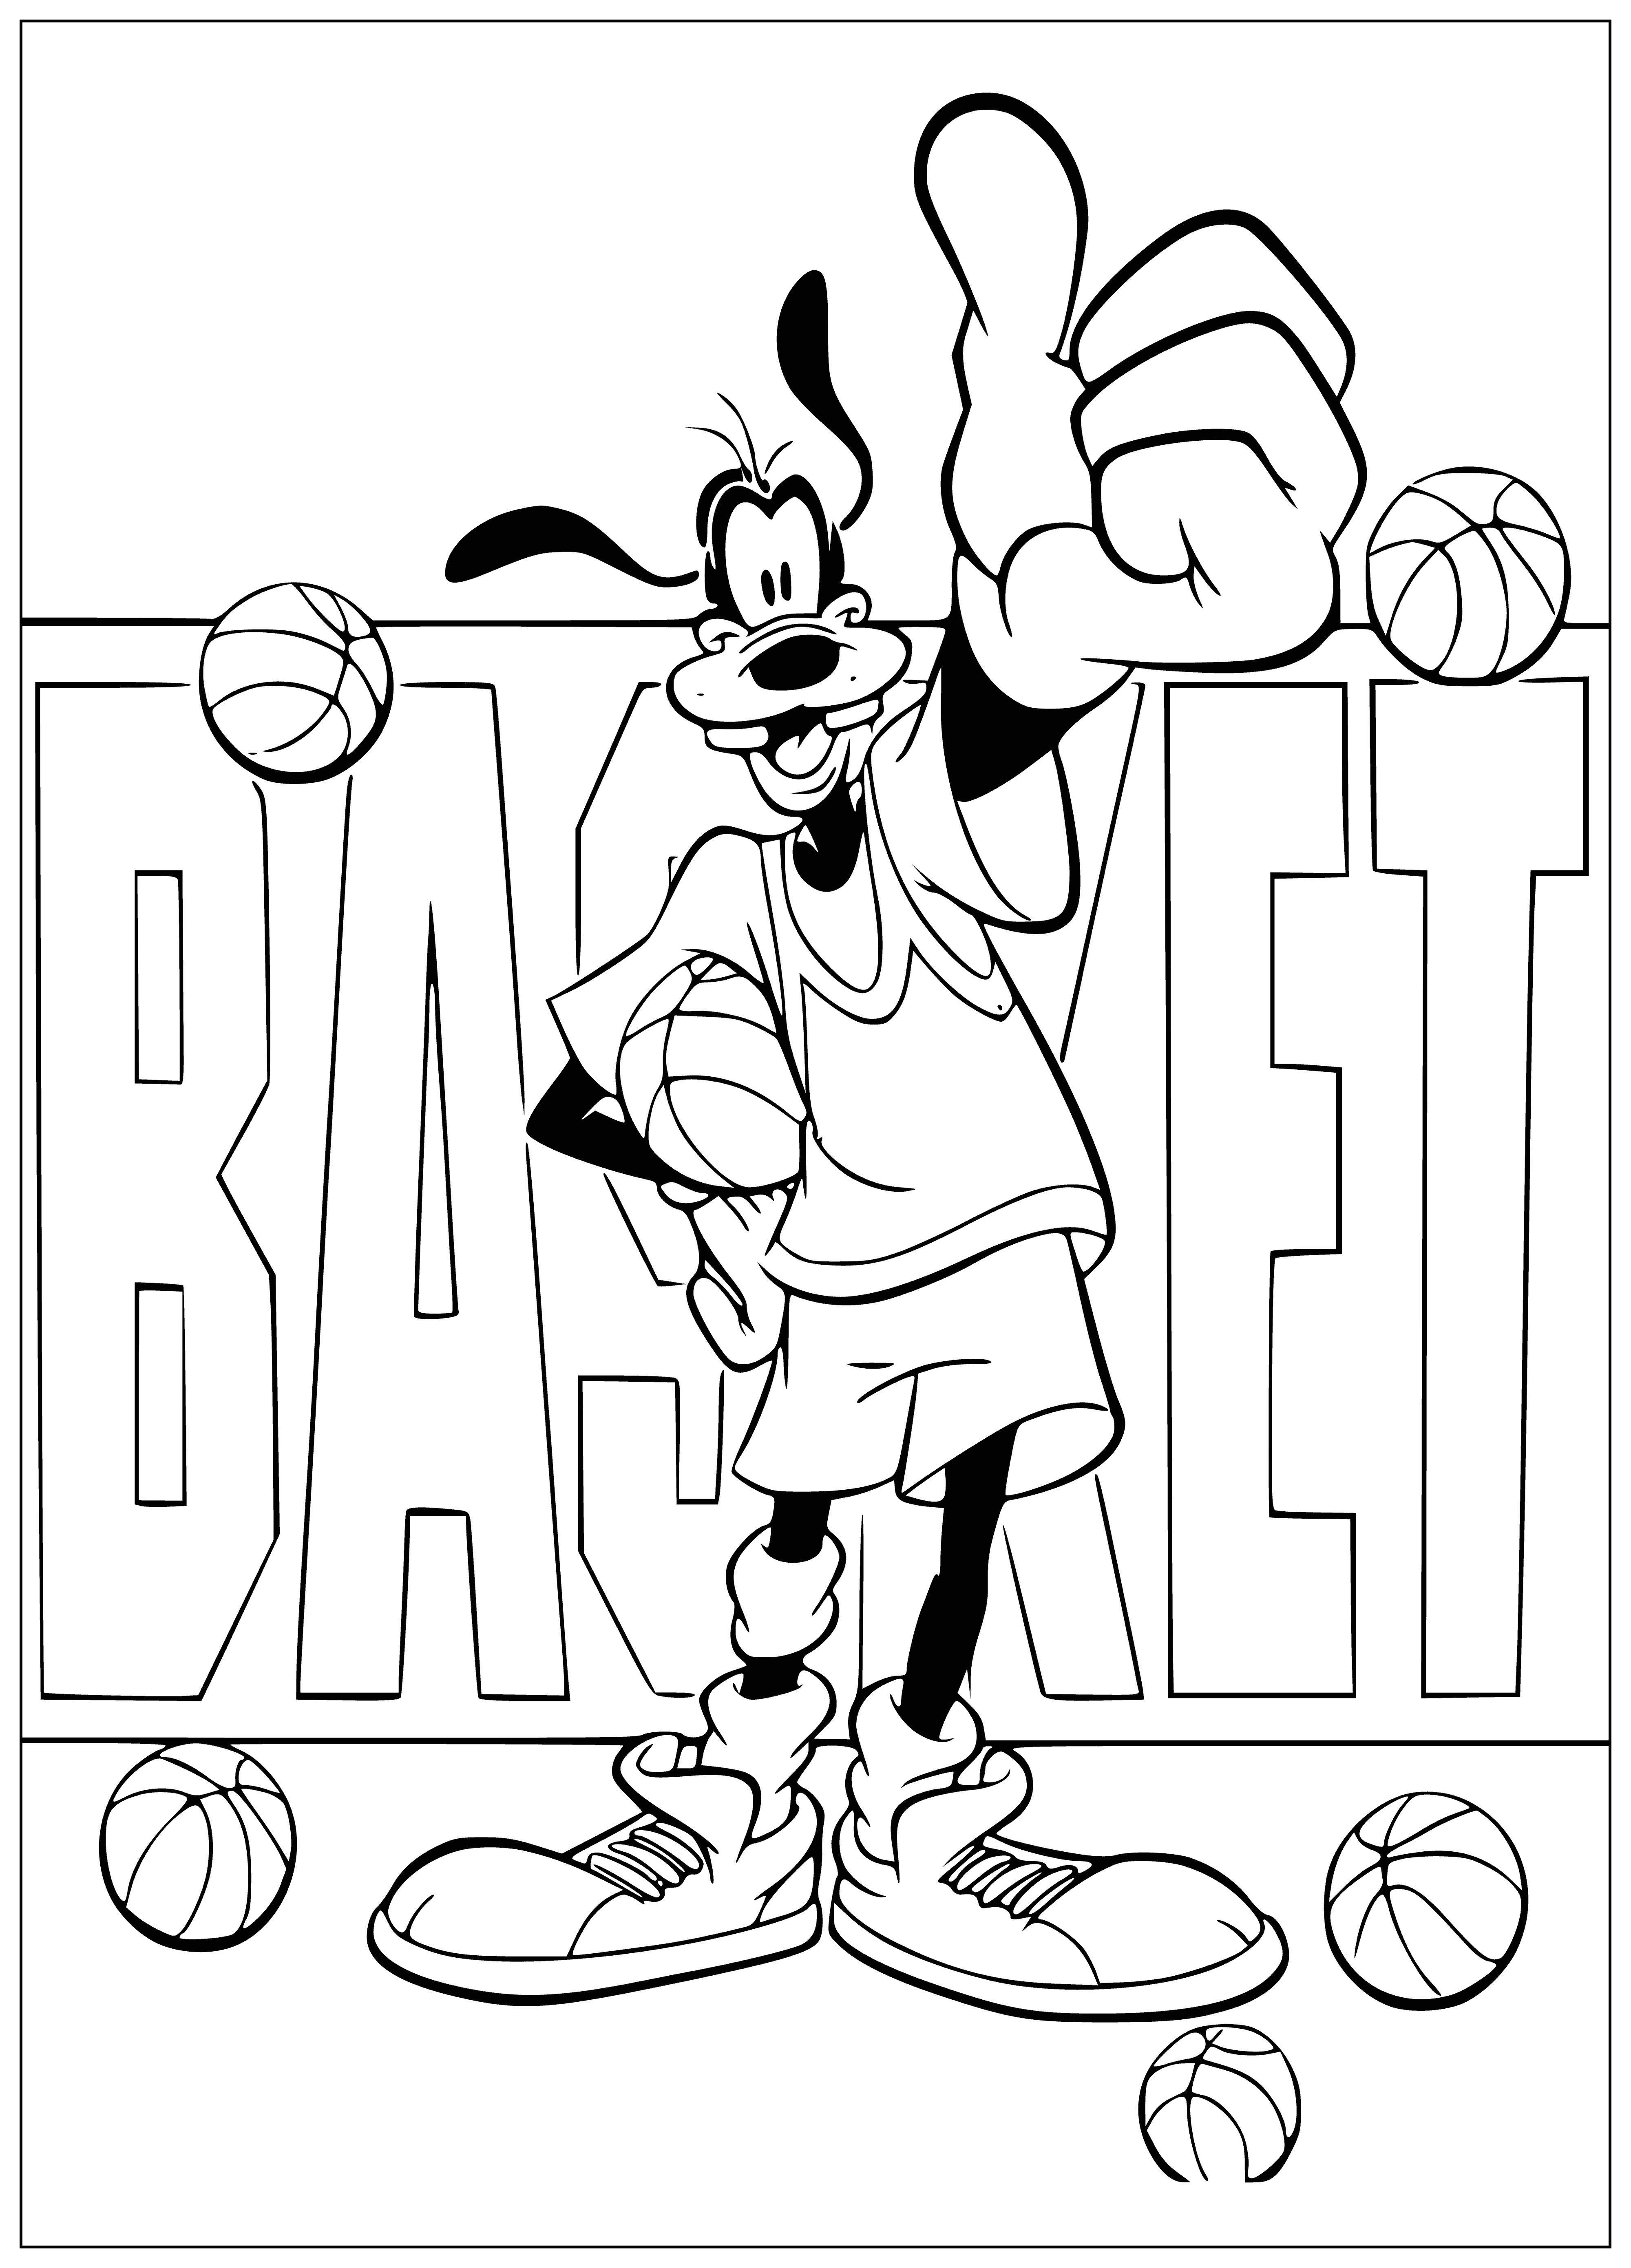 coloring page: Two mice & duck play basketball on court wearing red/blue. All with arms outstretched & mice holding basketball - looks like loads of fun!